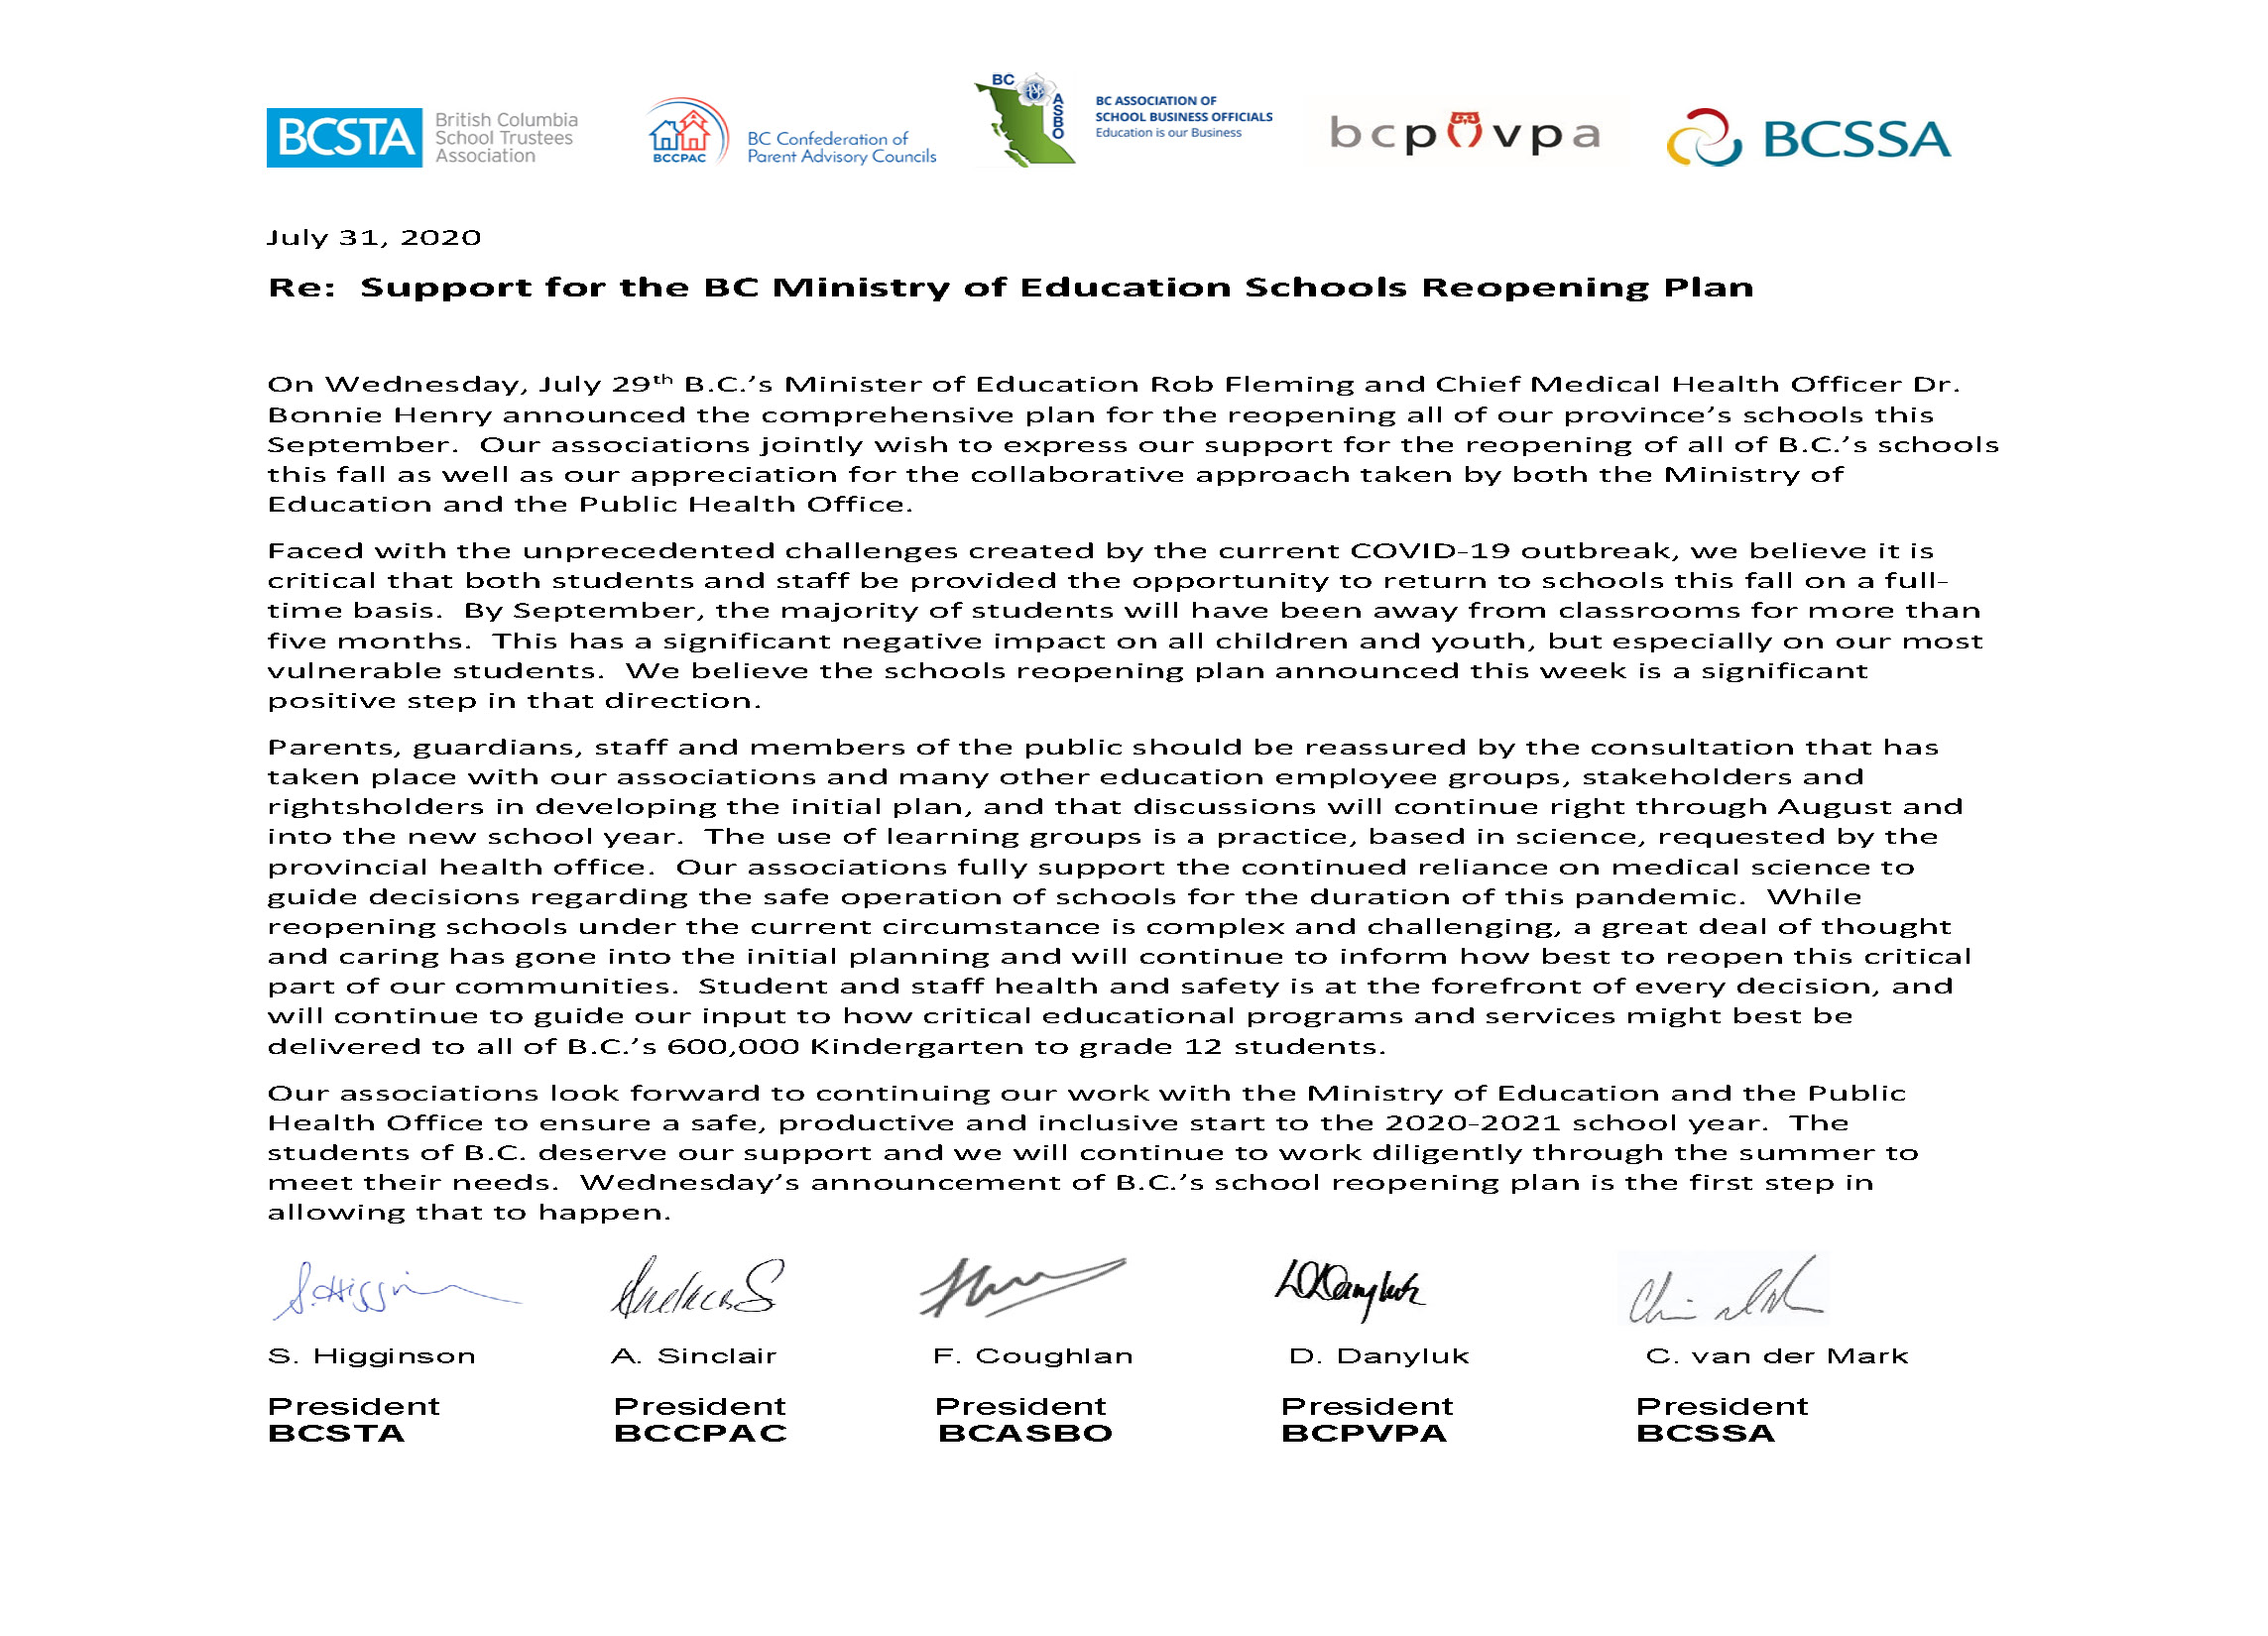 _Joint Partners Letter of Support for MoE schools reopening plan - July 31-20203.jpg